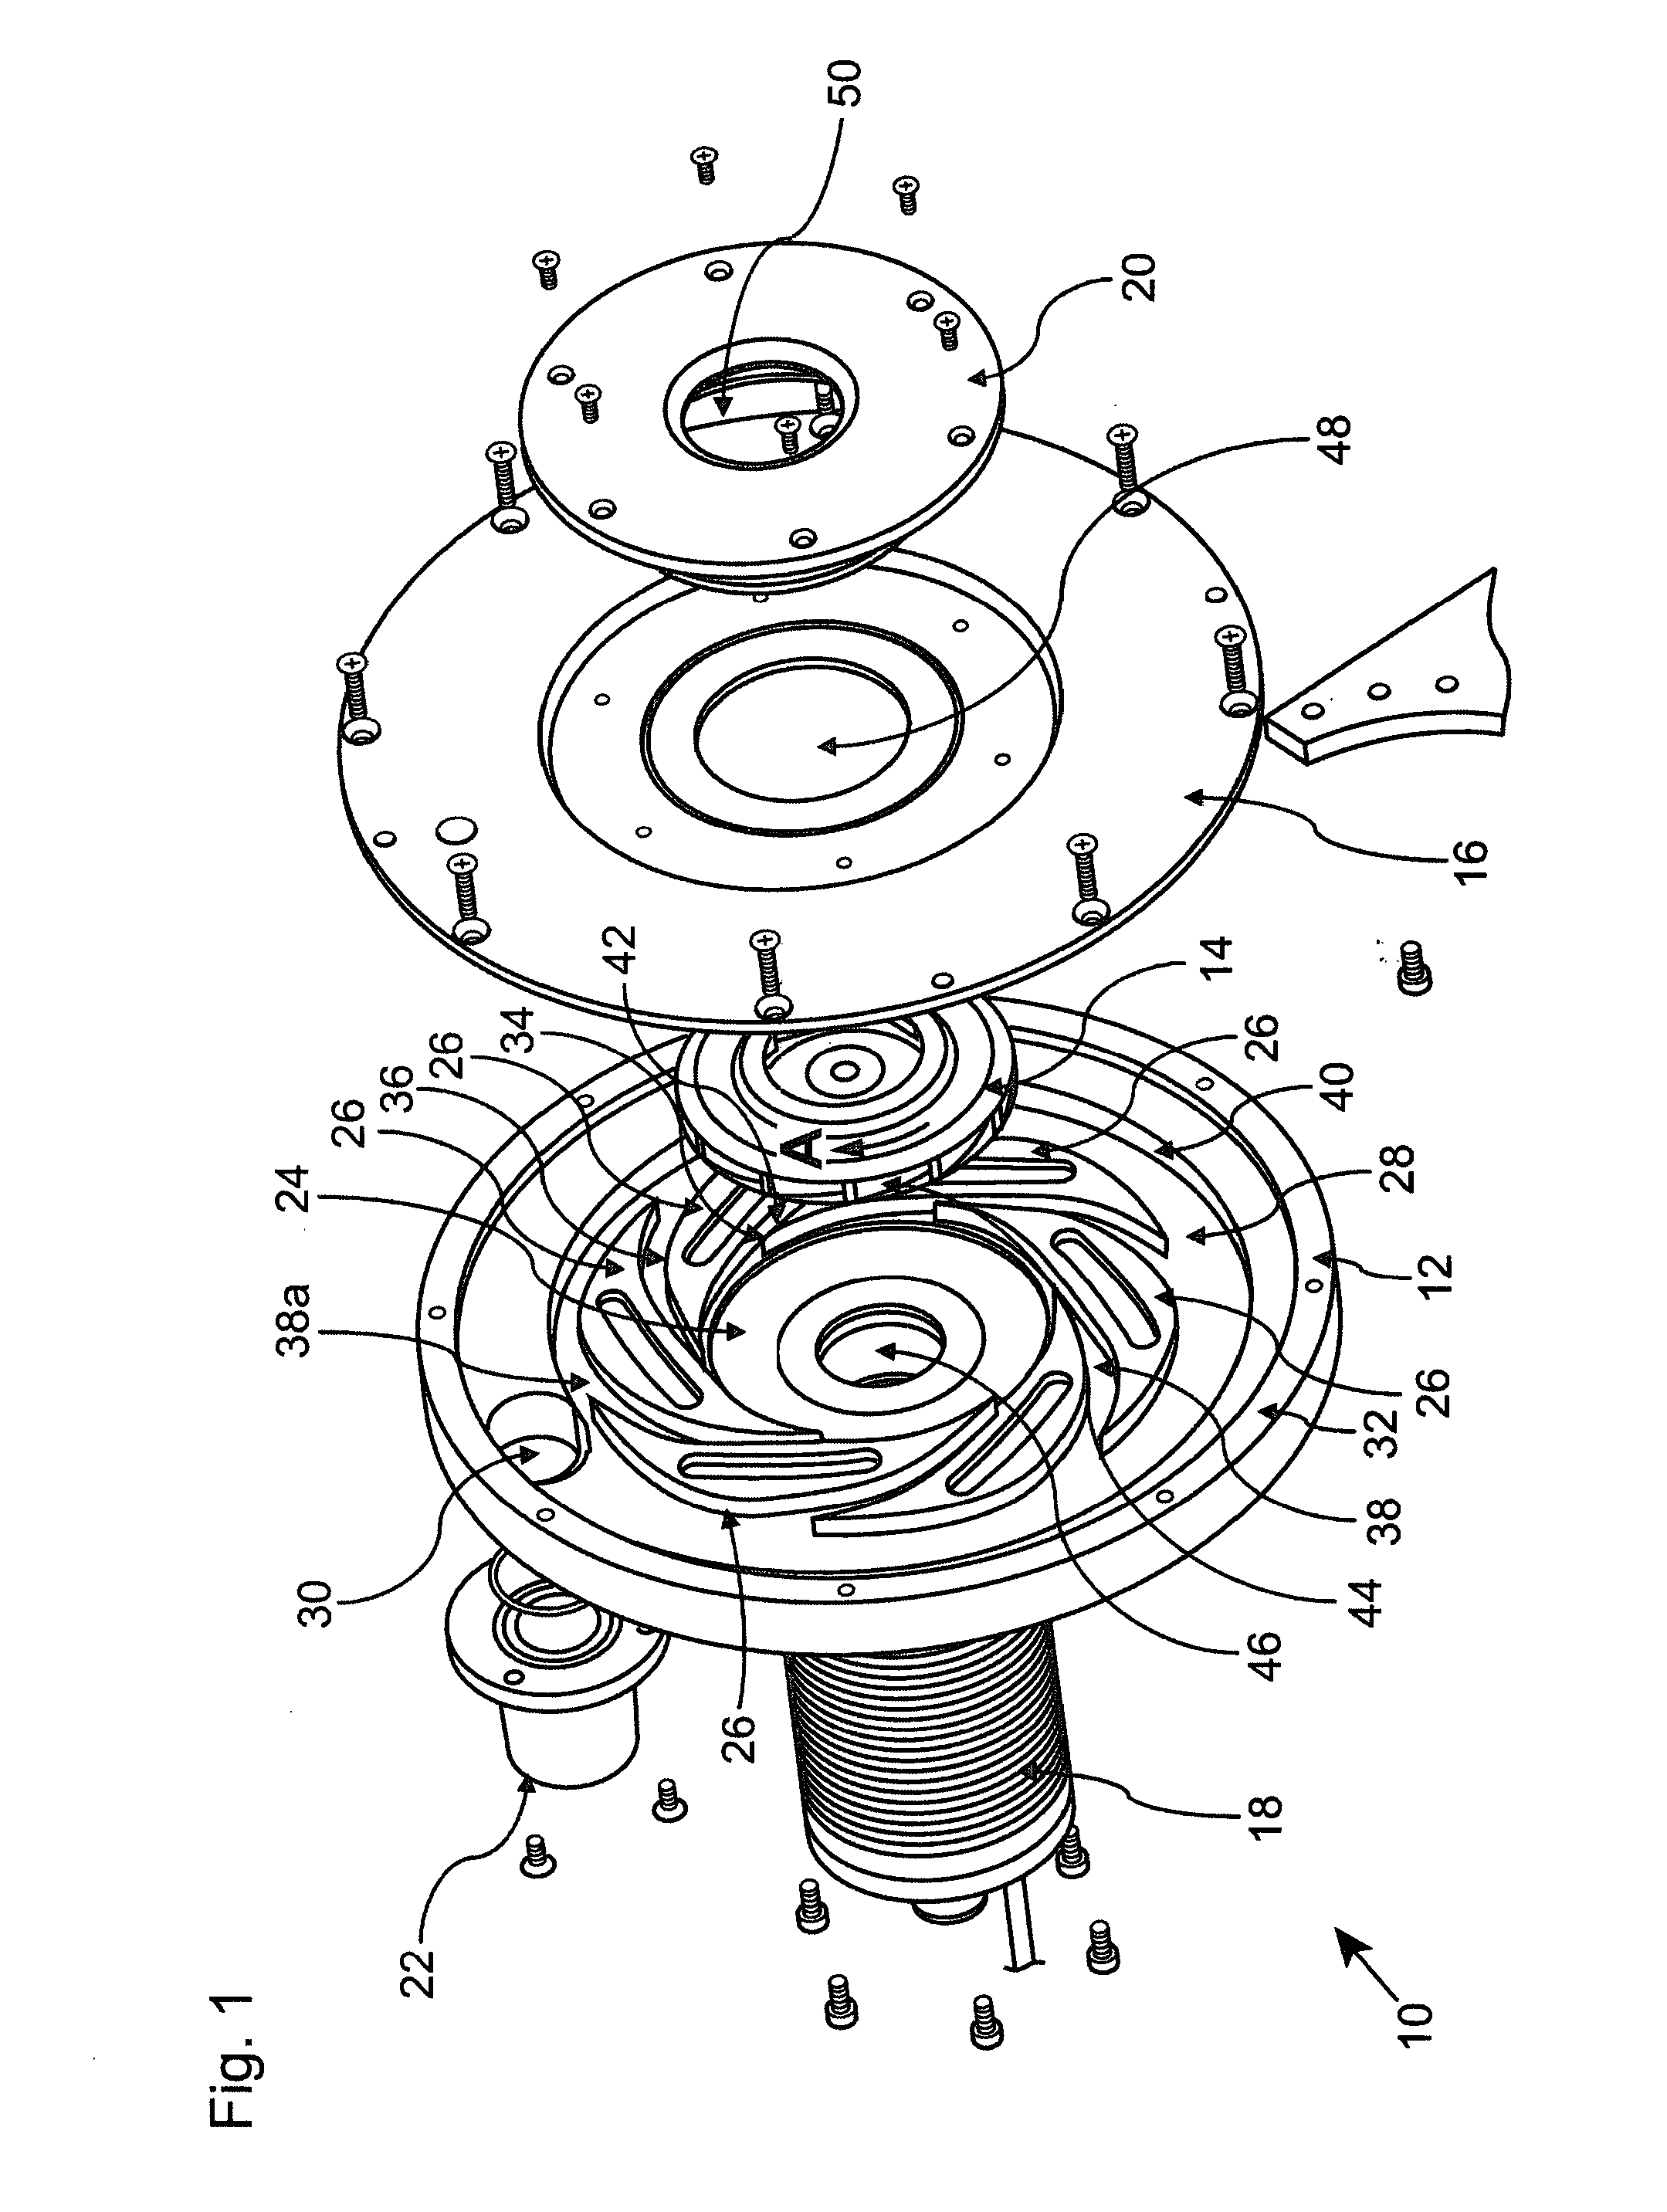 Diffuser for a Forward-Swept Tangential Flow Compressor